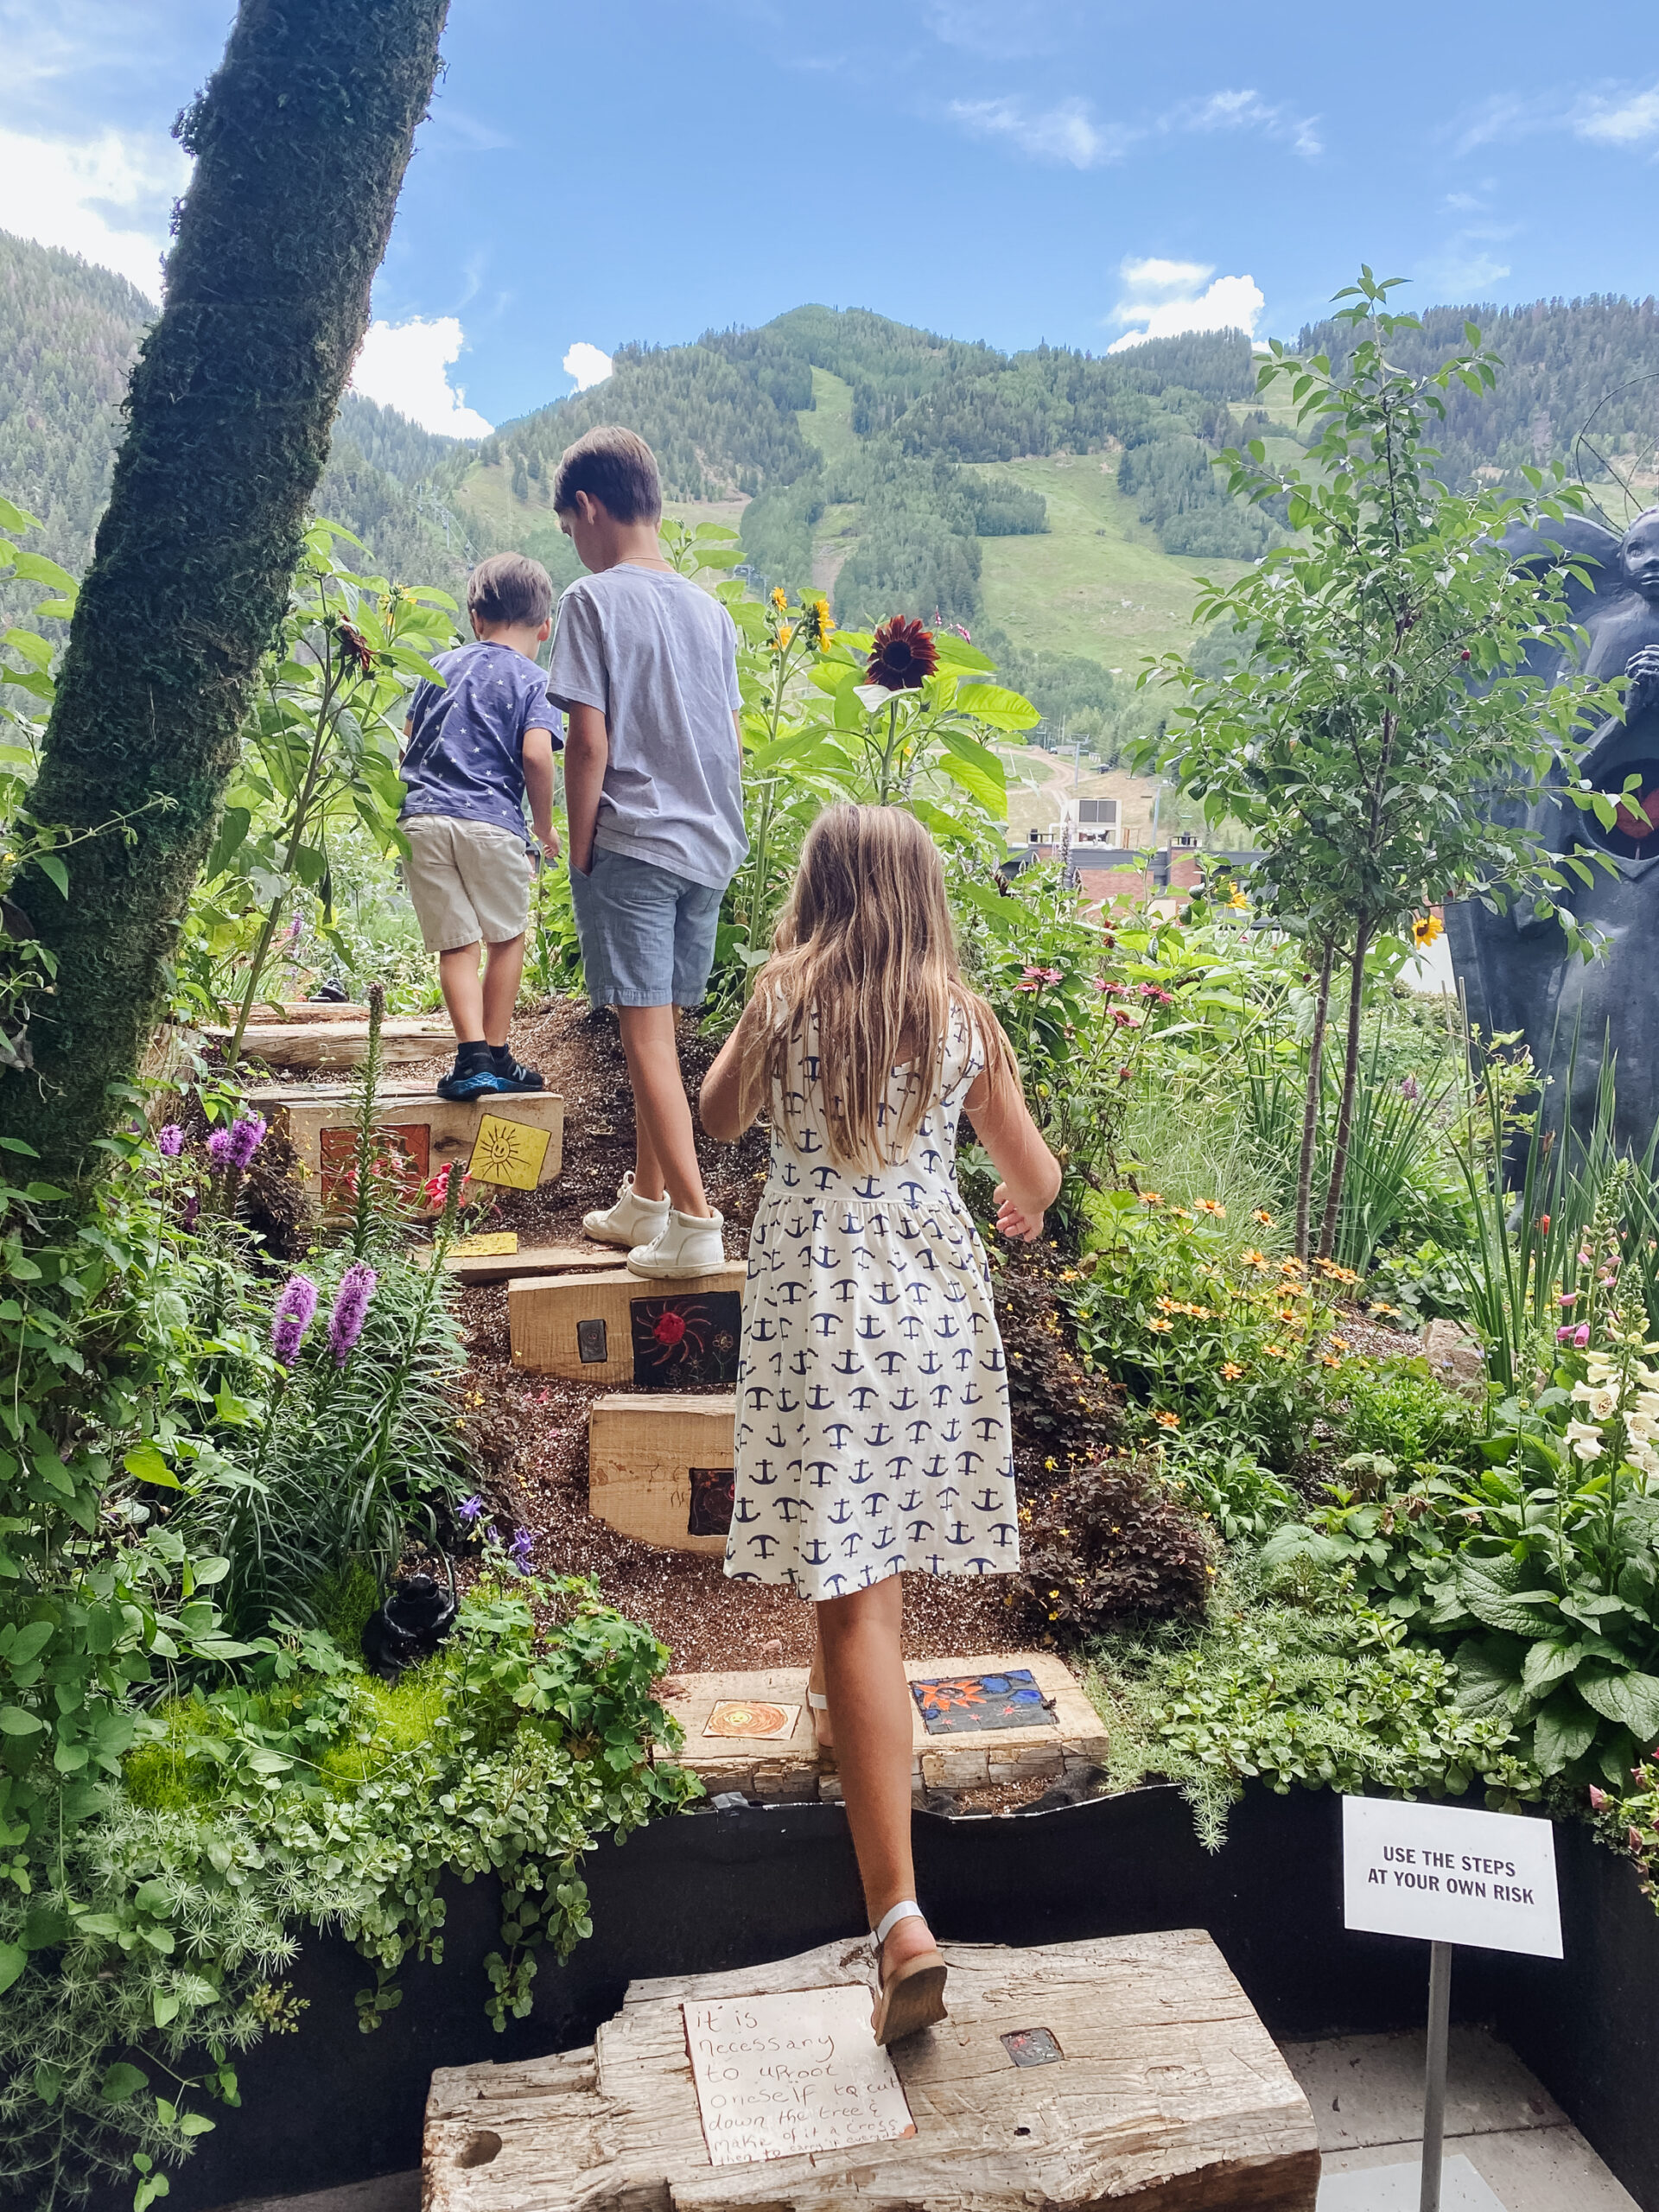 views from the top of the Aspen Art Museum of Aspen Mountain. You can grab lunch here too! #aspenartmuseum #thingstodoinaspen #travelwithkids